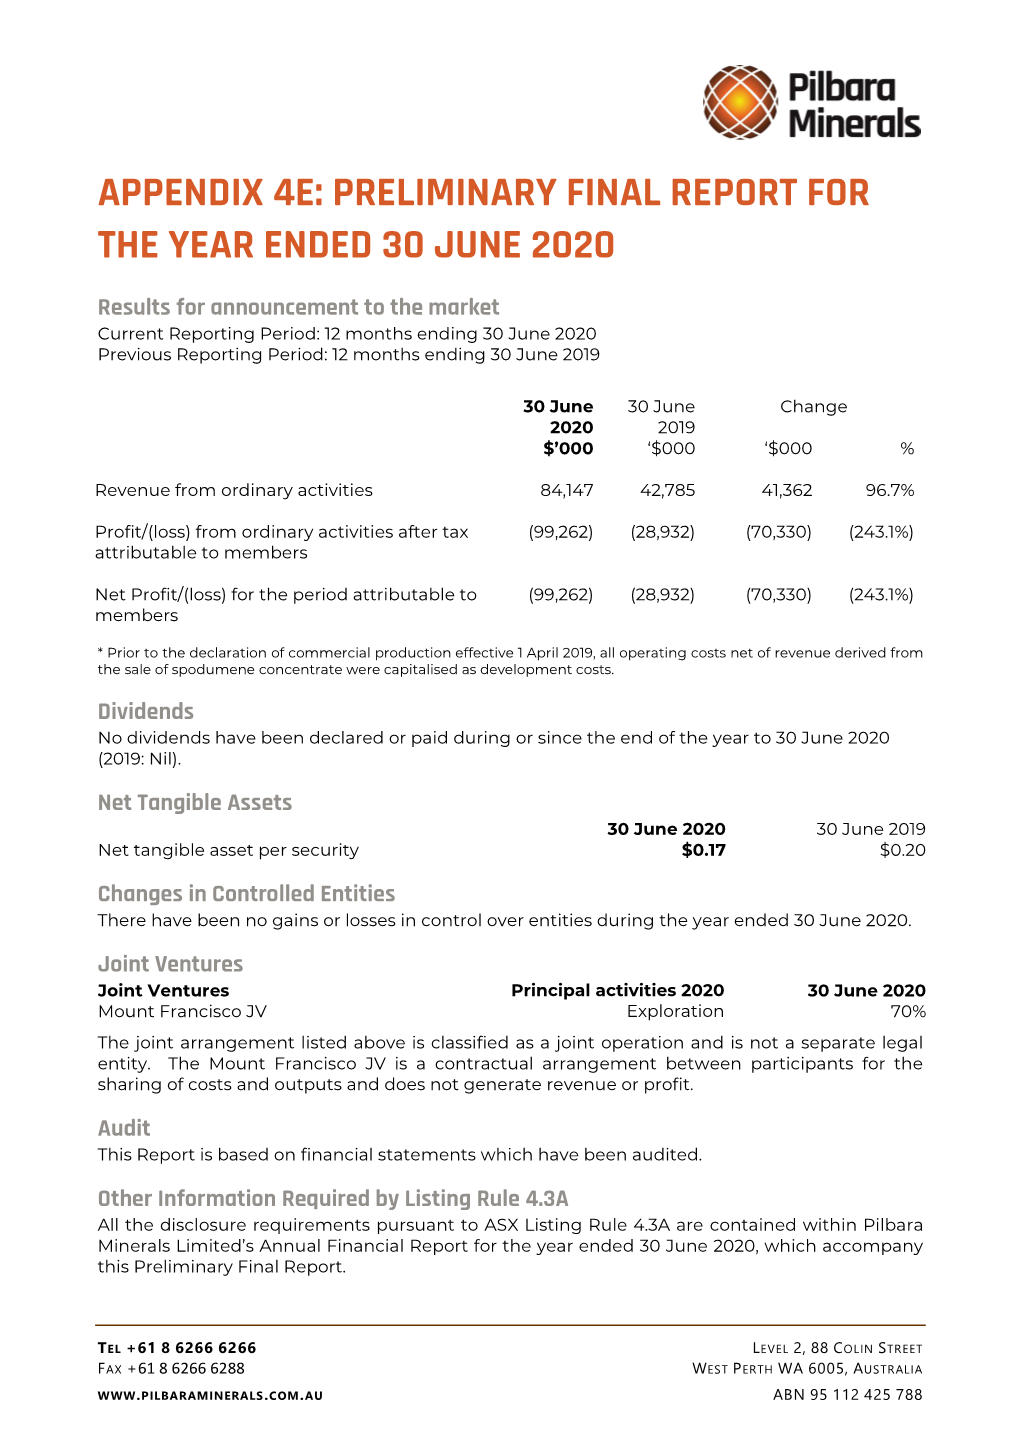 Appendix 4E: Preliminary Final Report for the Year Ended 30 June 2020